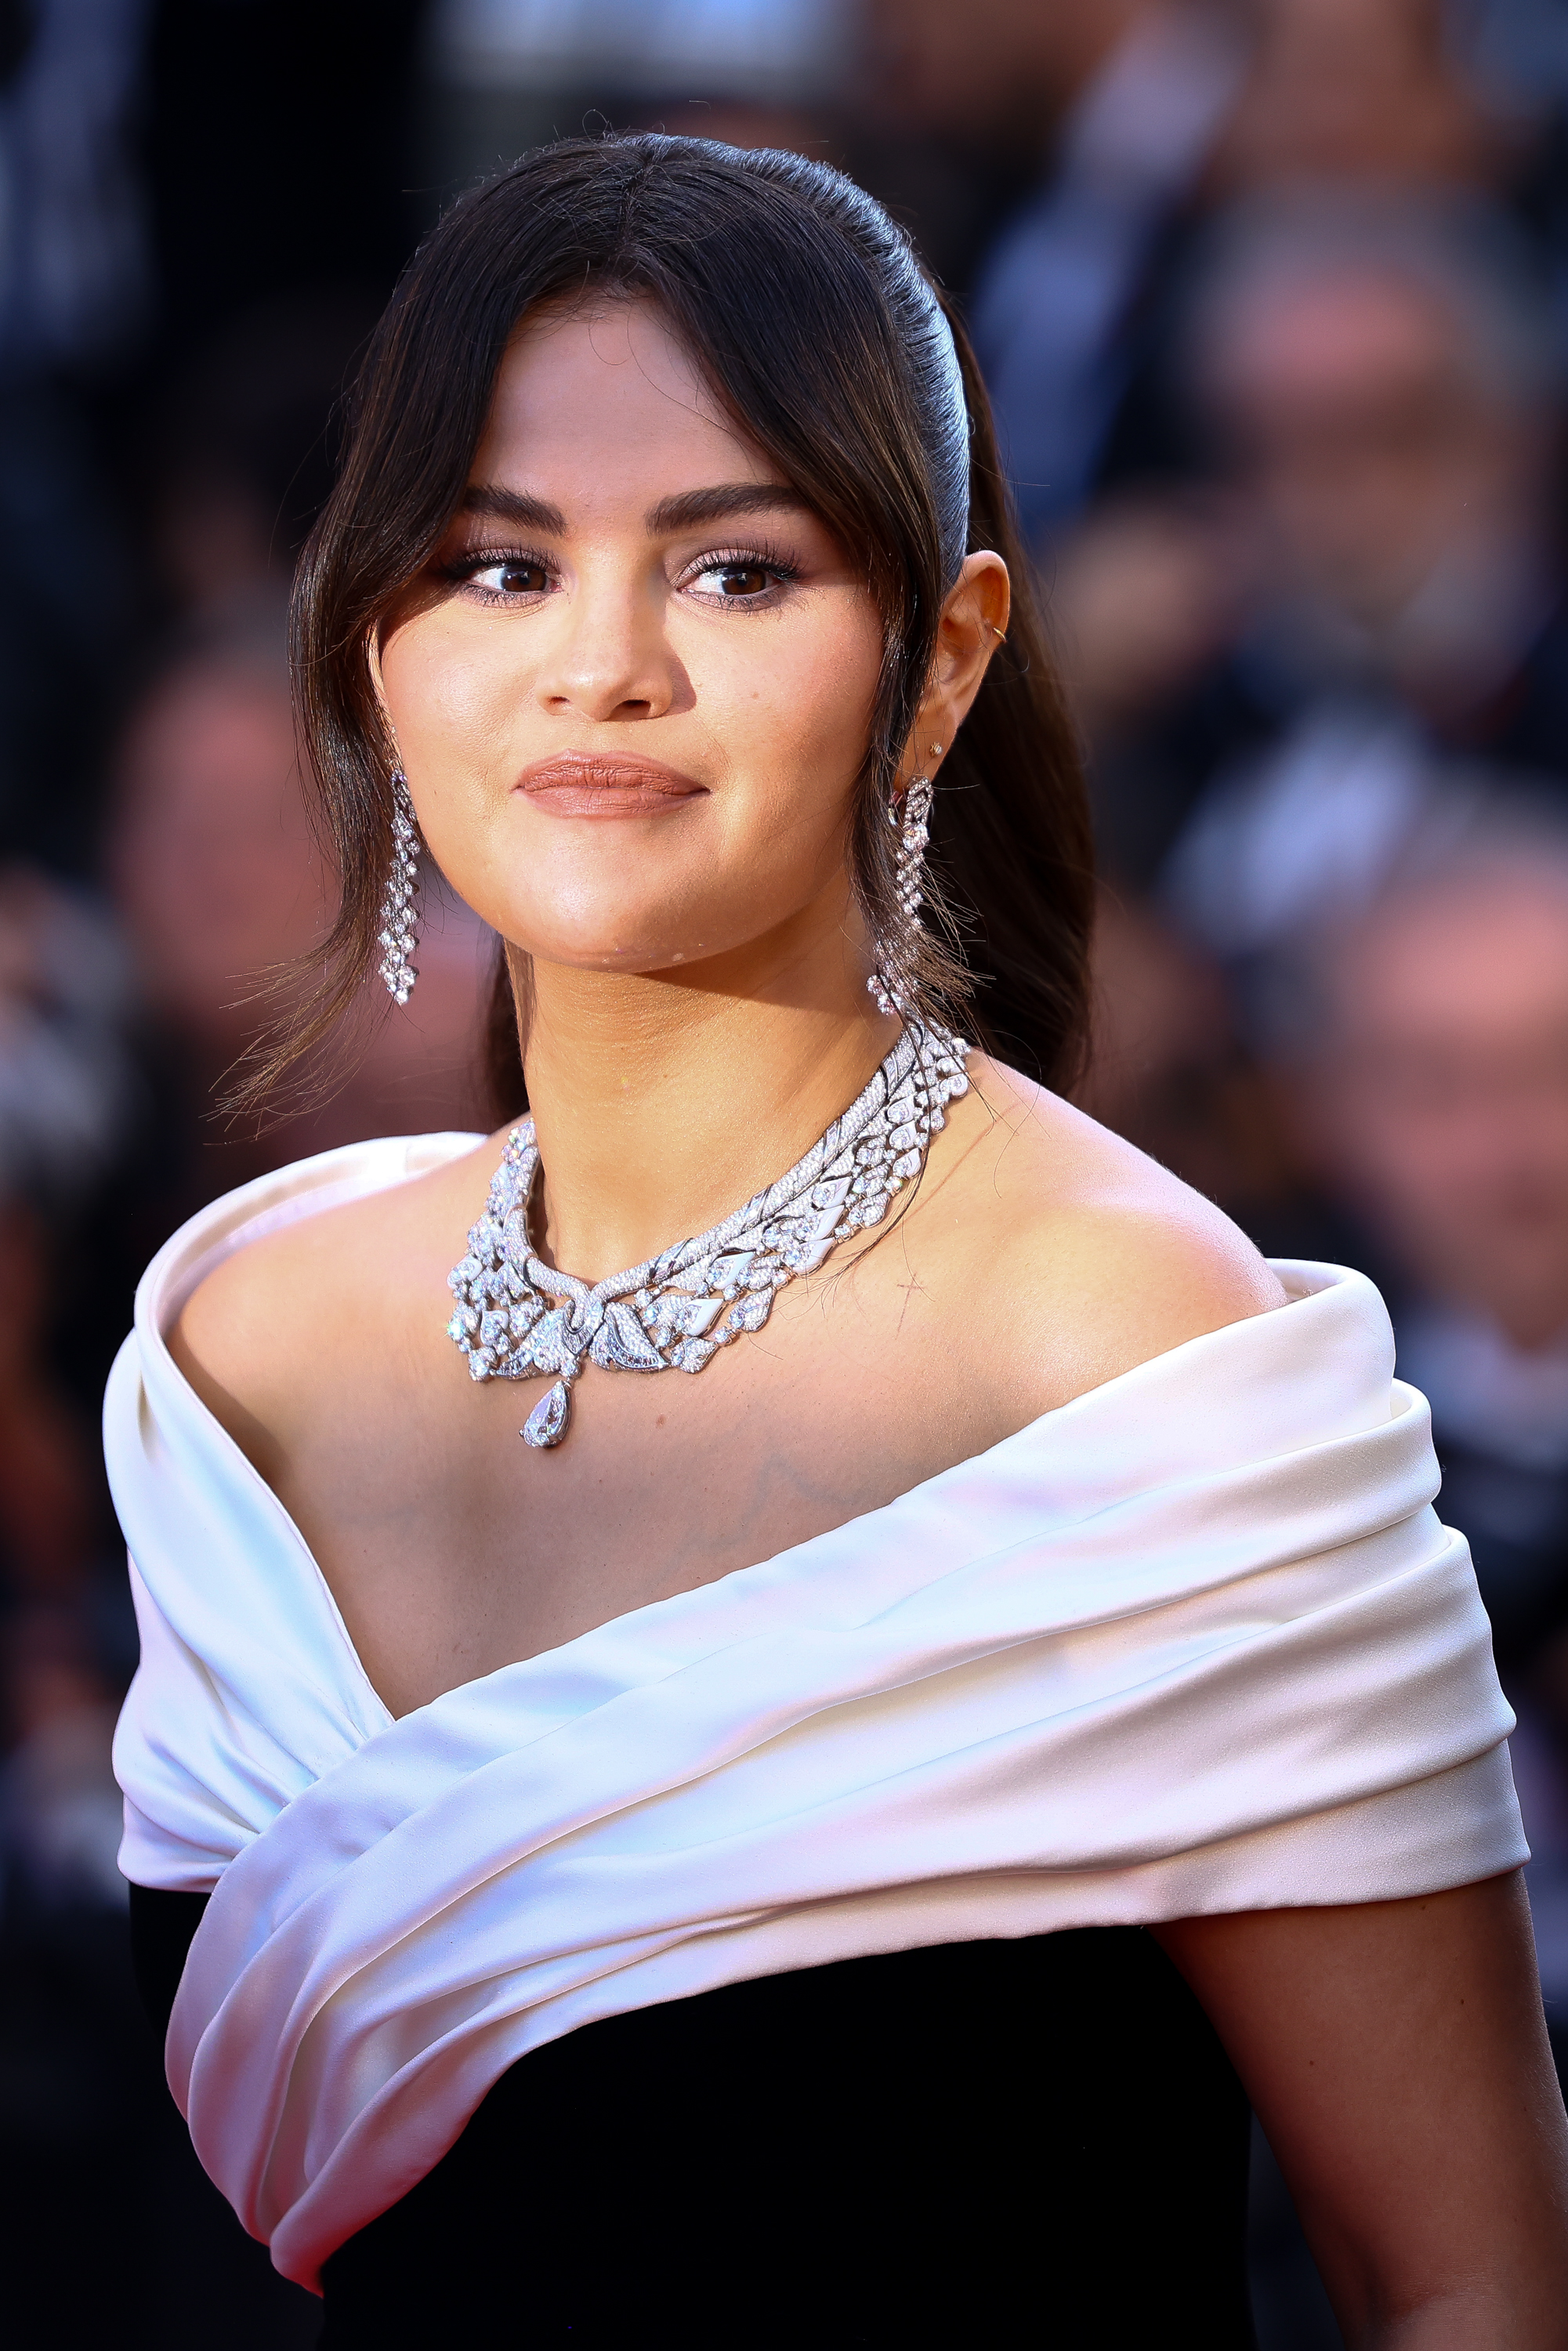 Selena Gomez visited France to promote her new movie Emilia Perez at the Cannes Film Festival